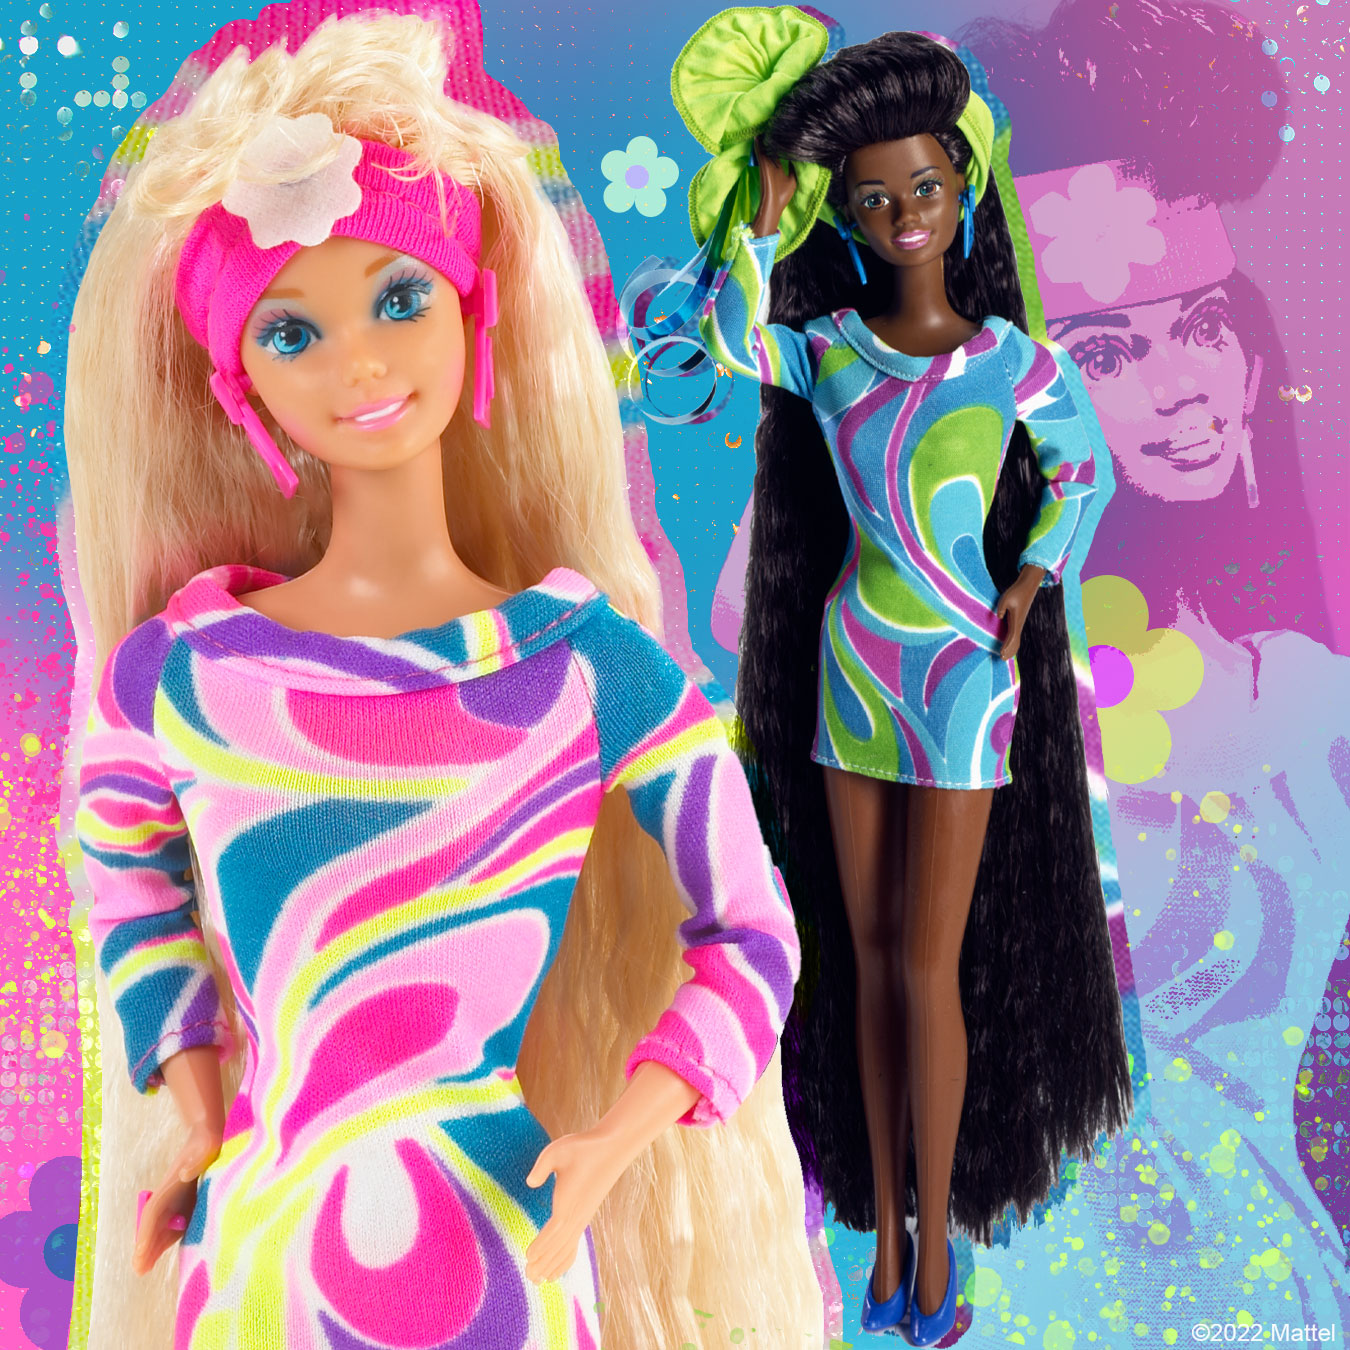 Økonomi Huddle benzin Barbie on X: "Ready for a #throwback? We're looking back at some of our  most memorable dolls from 20, 30, 40 years ago! 🤩 Which #Barbie was your  childhood favorite? https://t.co/3GZpR66UUu" /